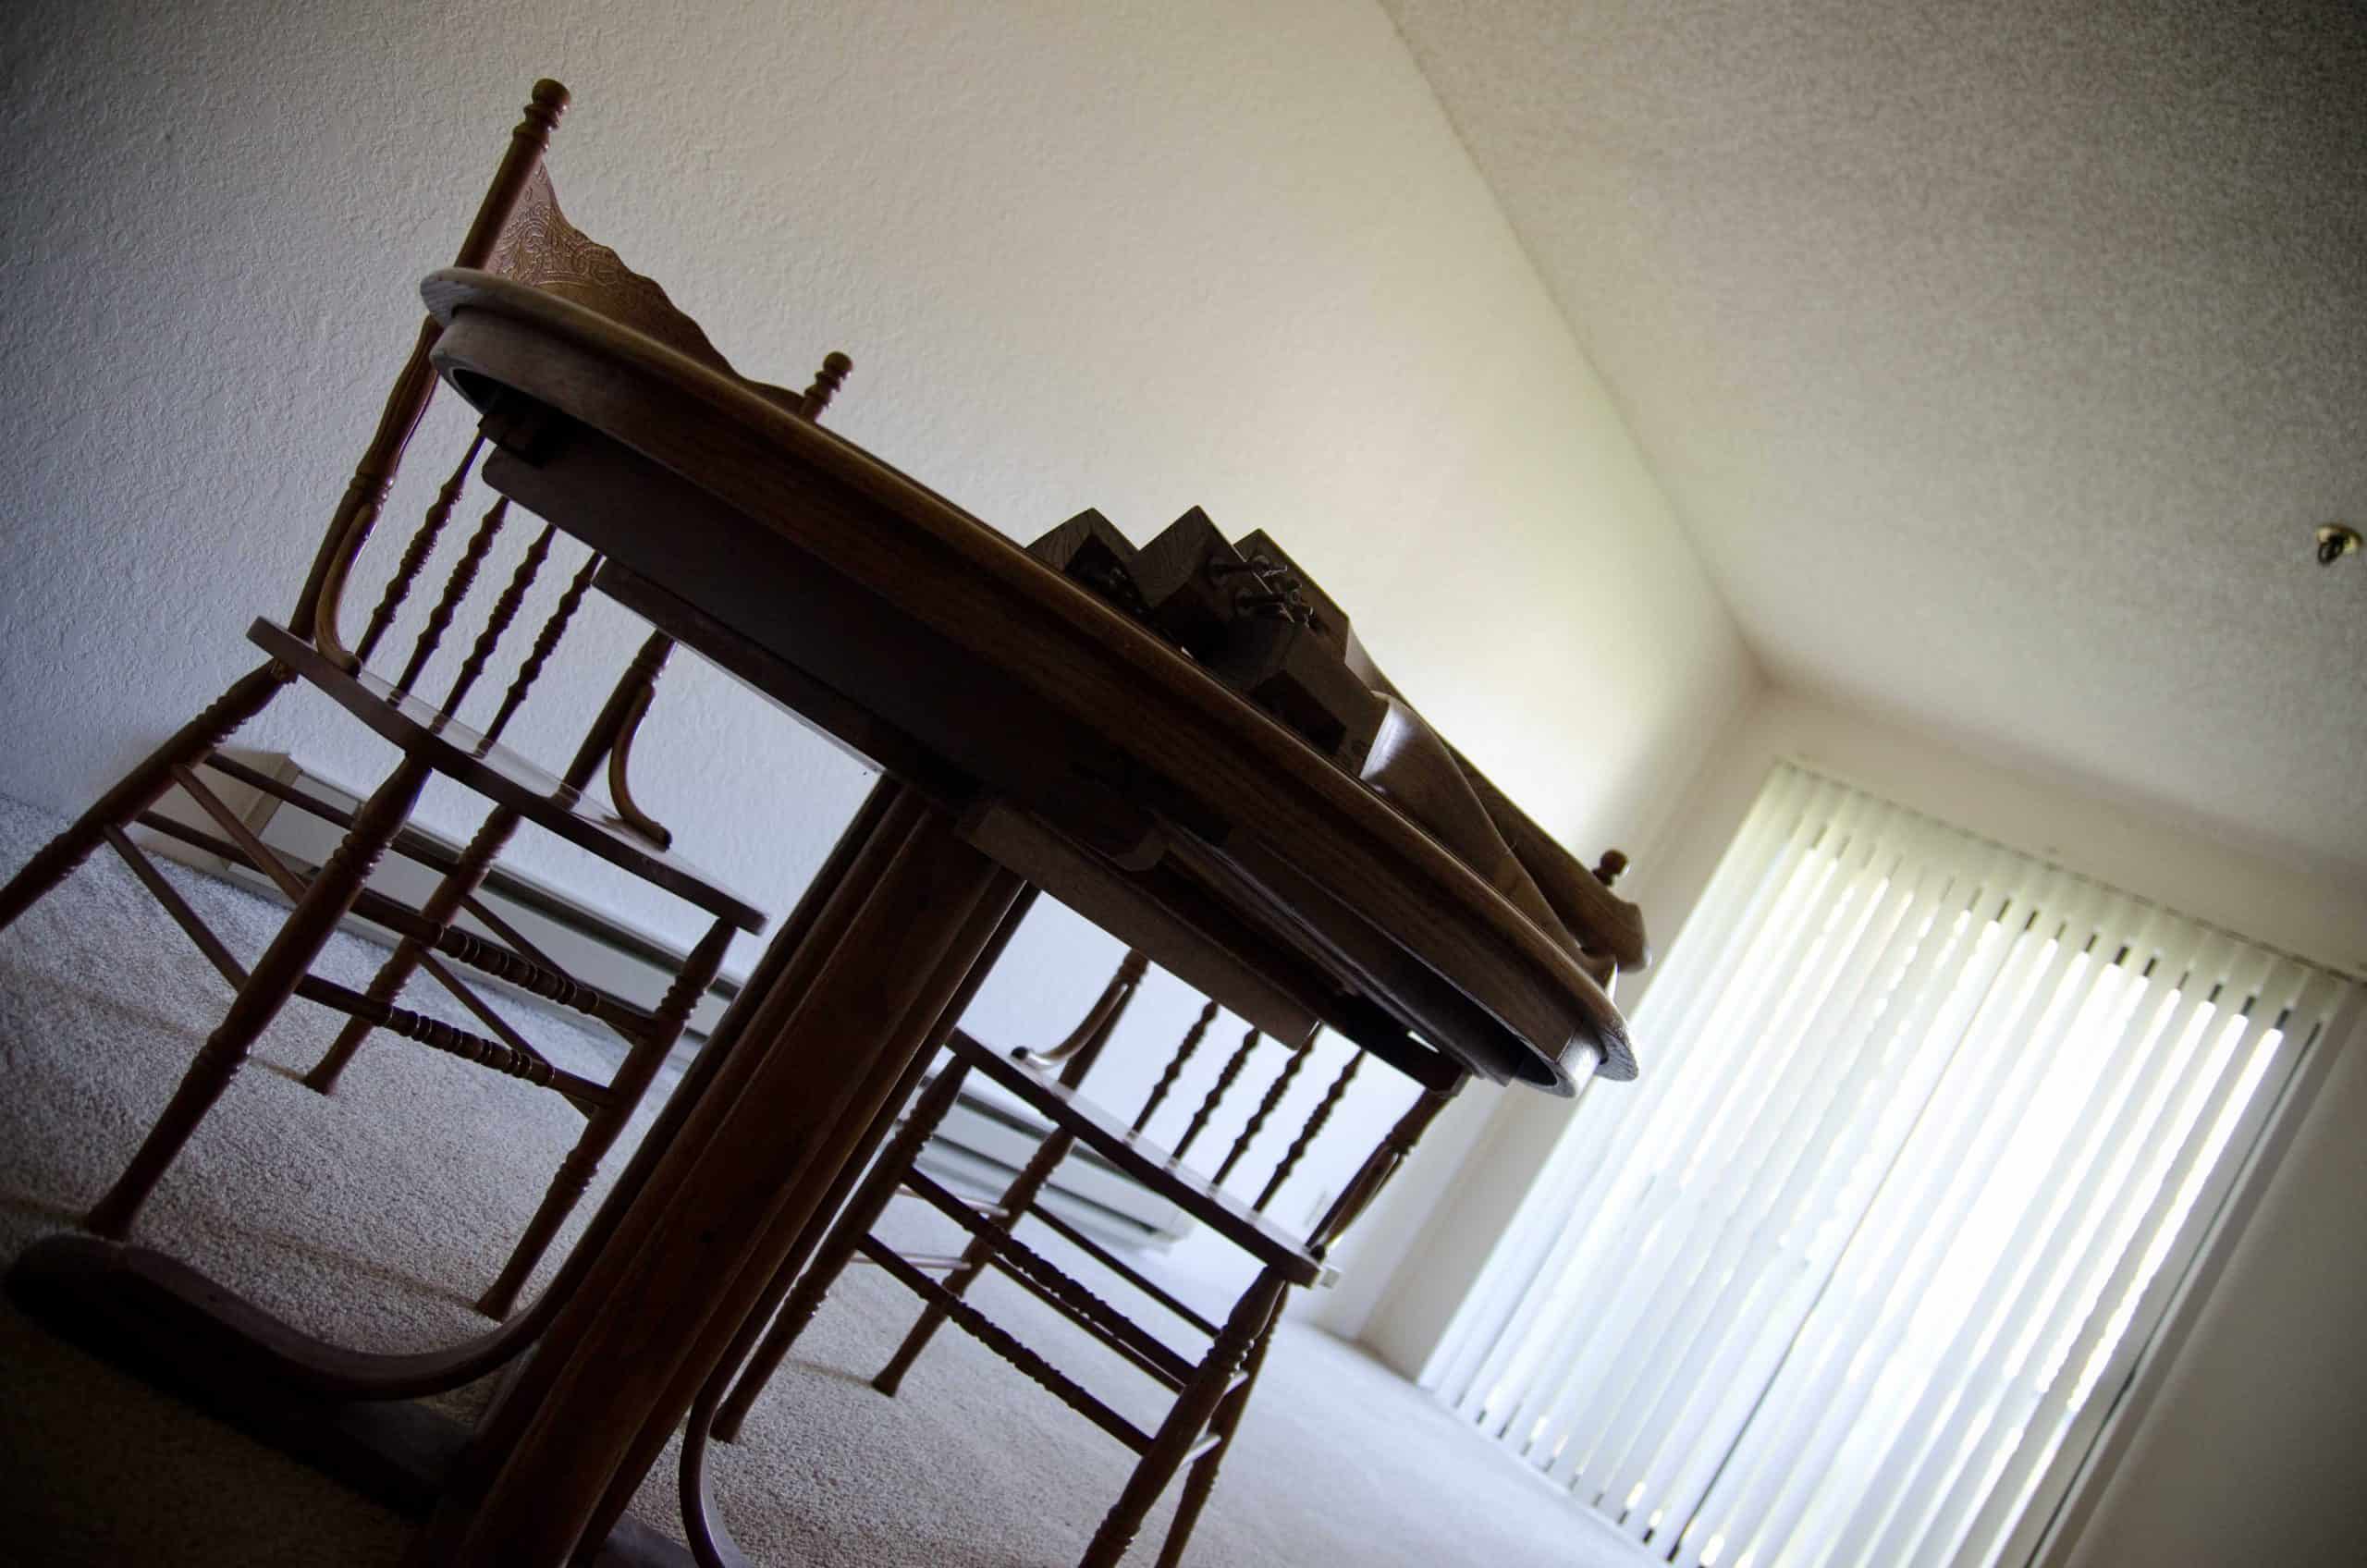 Furniture donations to World Relief help set up first time apartment homes.